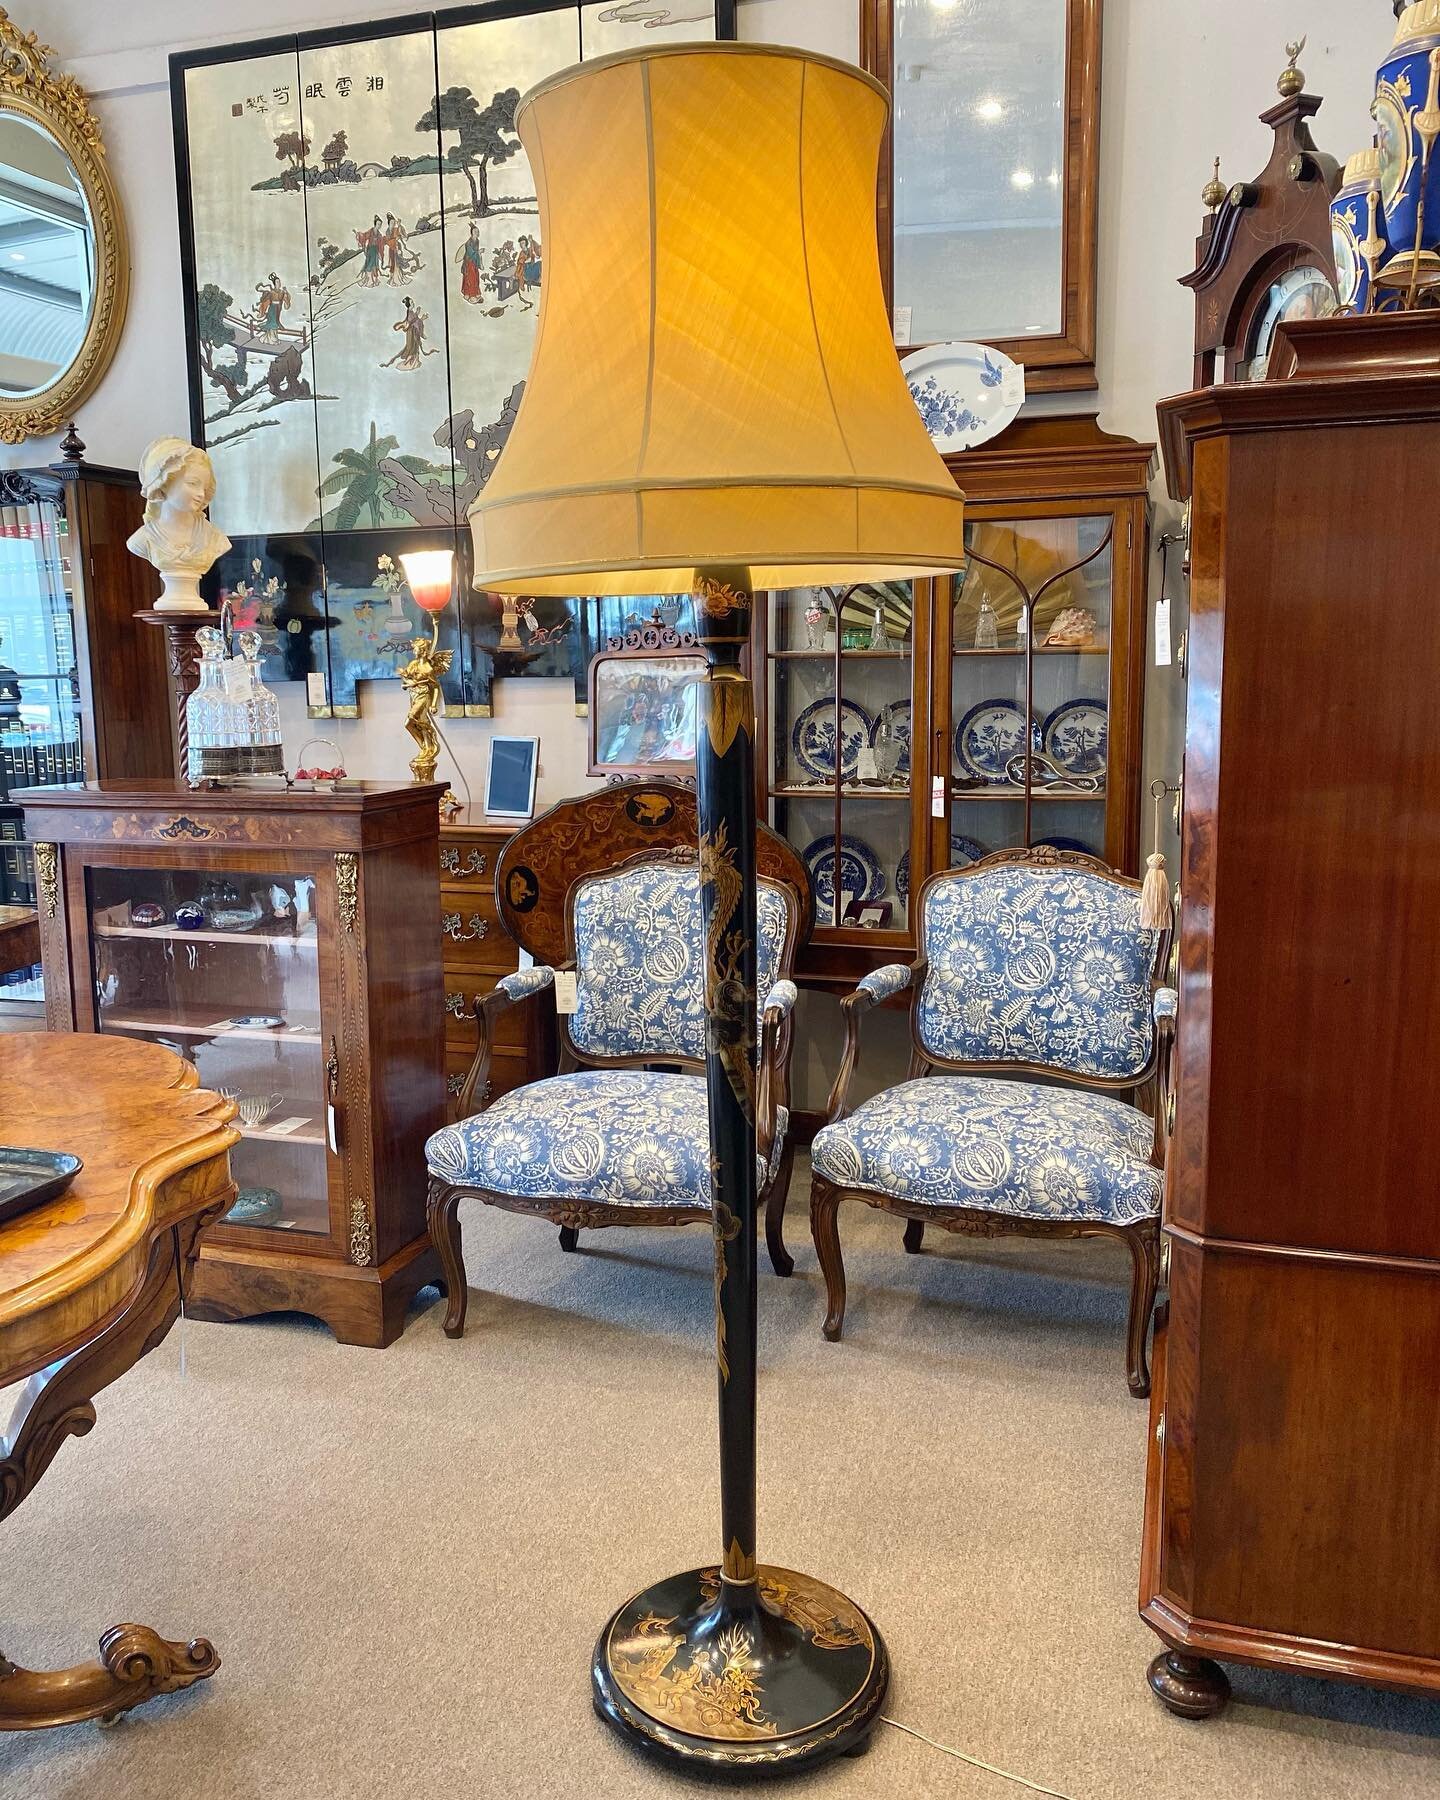 SOLD ~ An attractive early 20th century chinoiserie standard lamp depicting dragon motifs with shade.